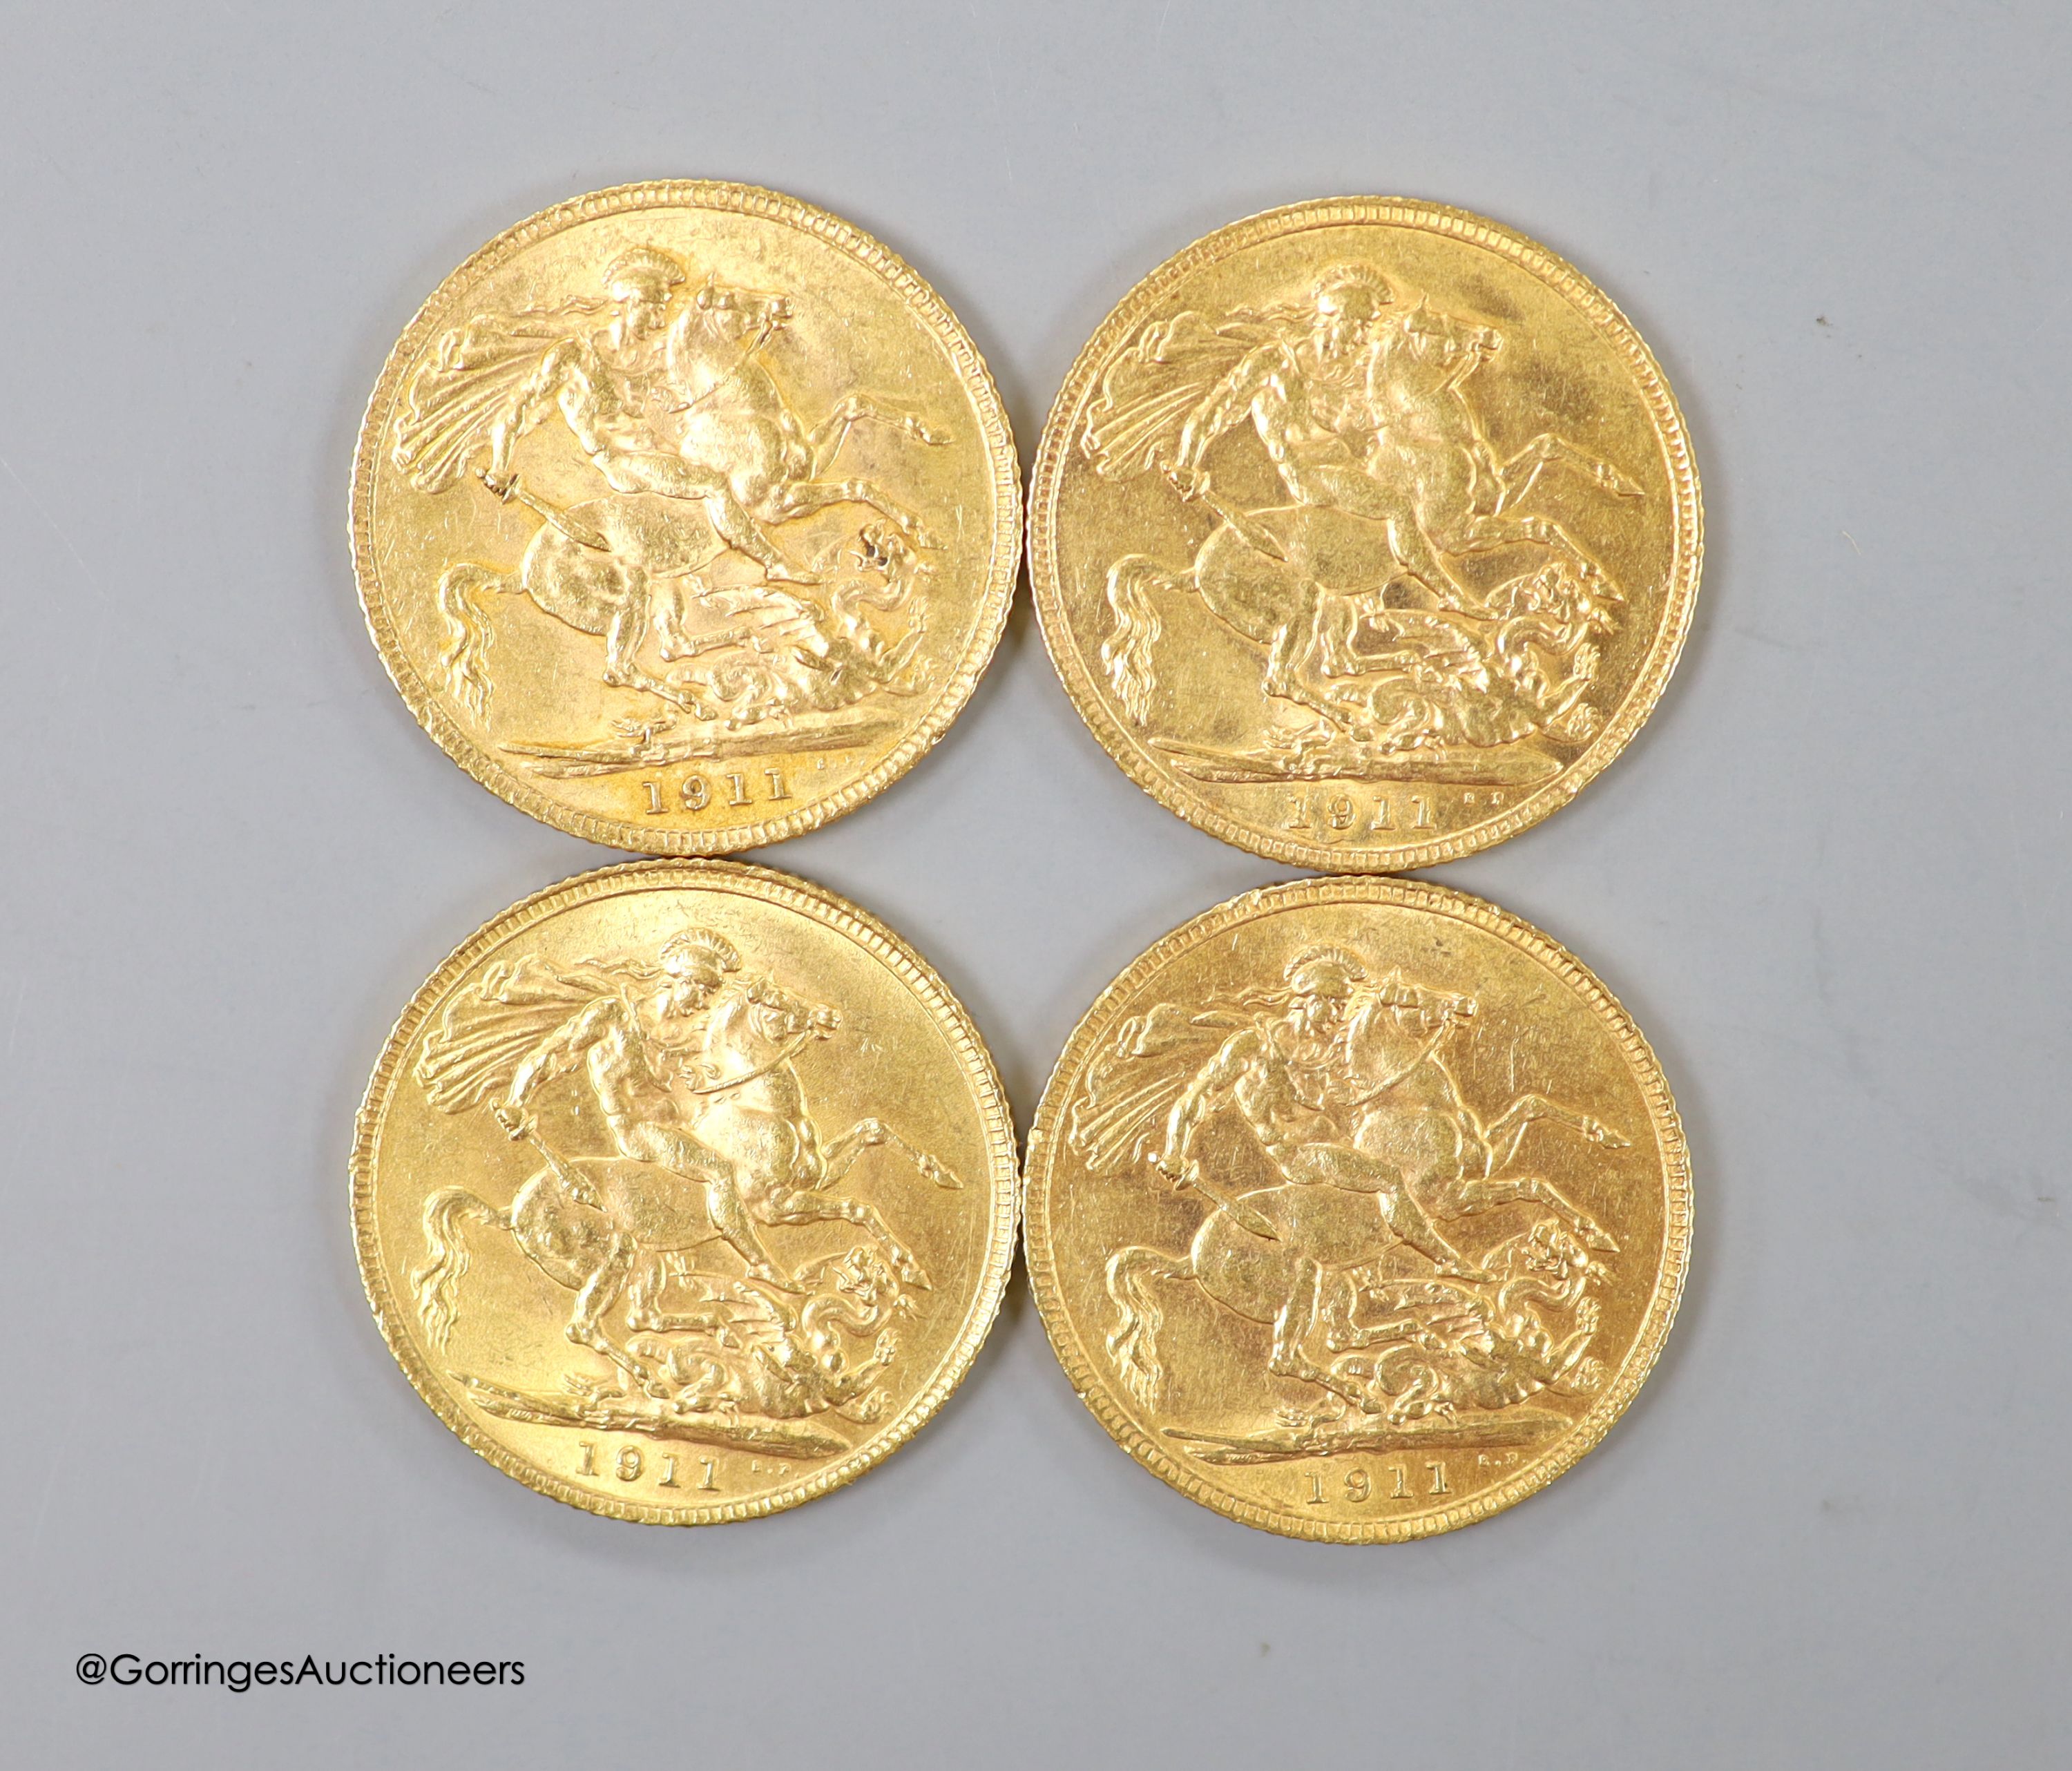 Four George V gold sovereigns, all 1911